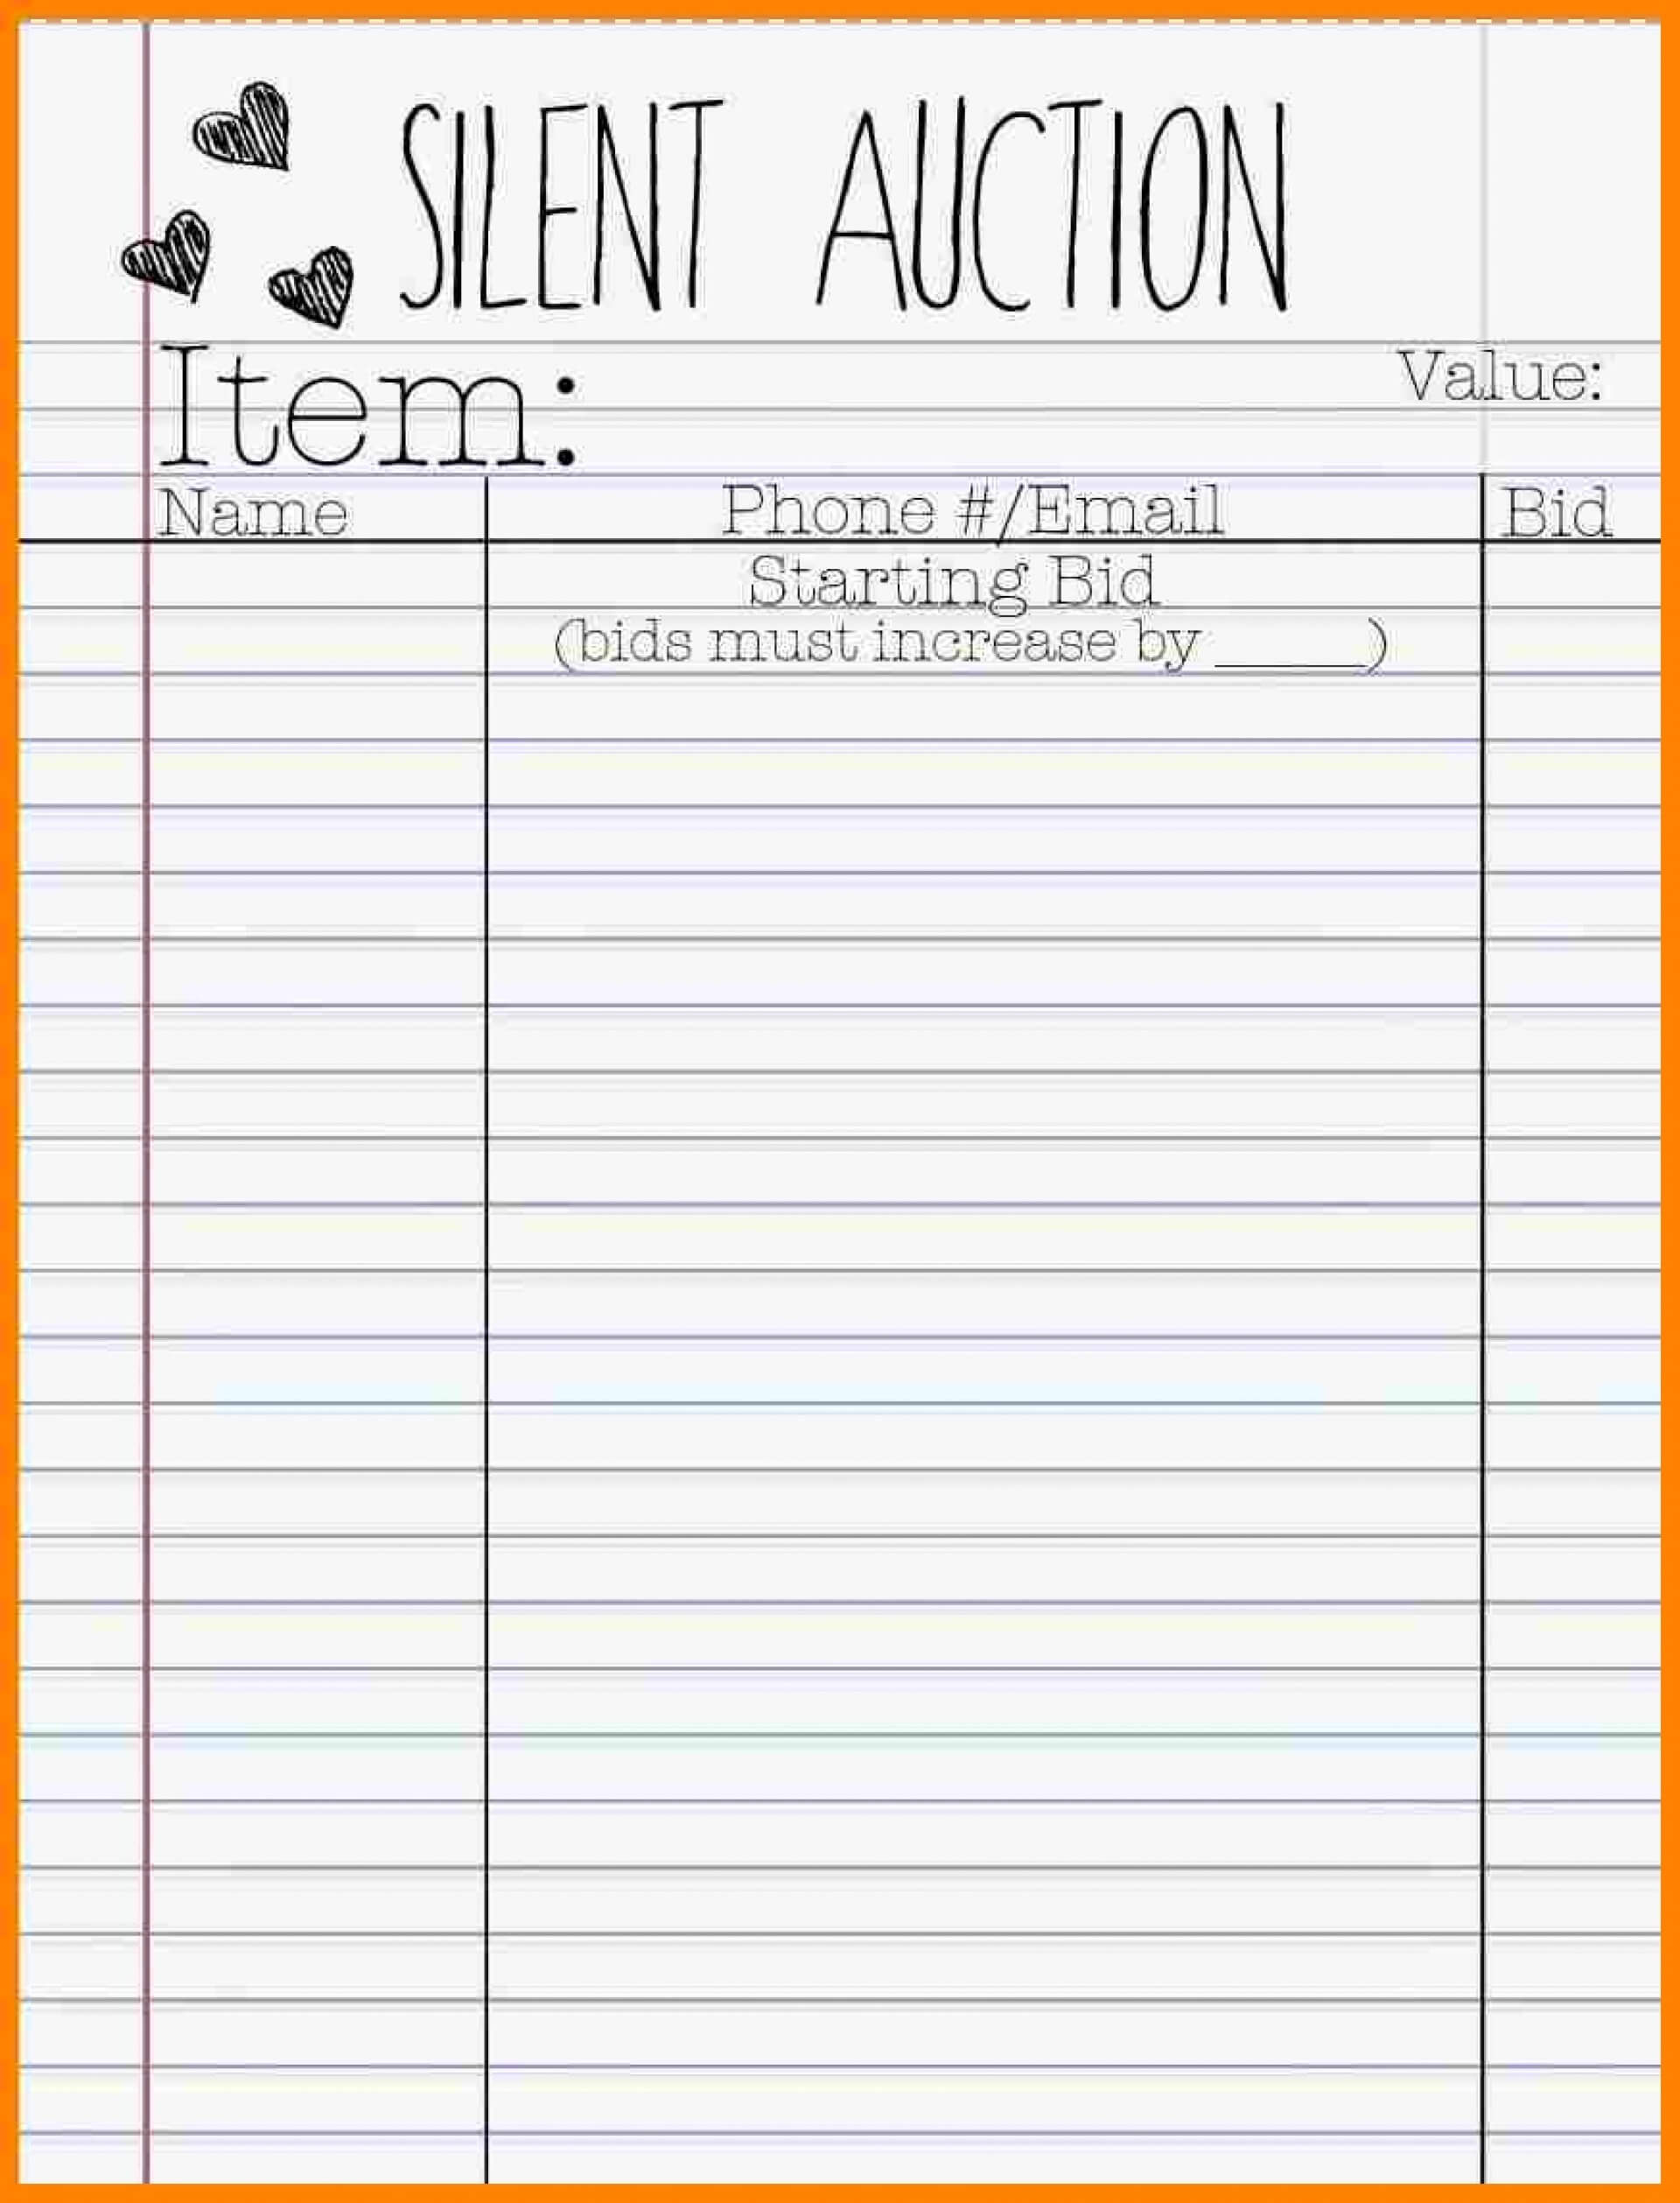 Silent Auction Template Google Docs (7) | Based Resume With Regard To Auction Bid Cards Template